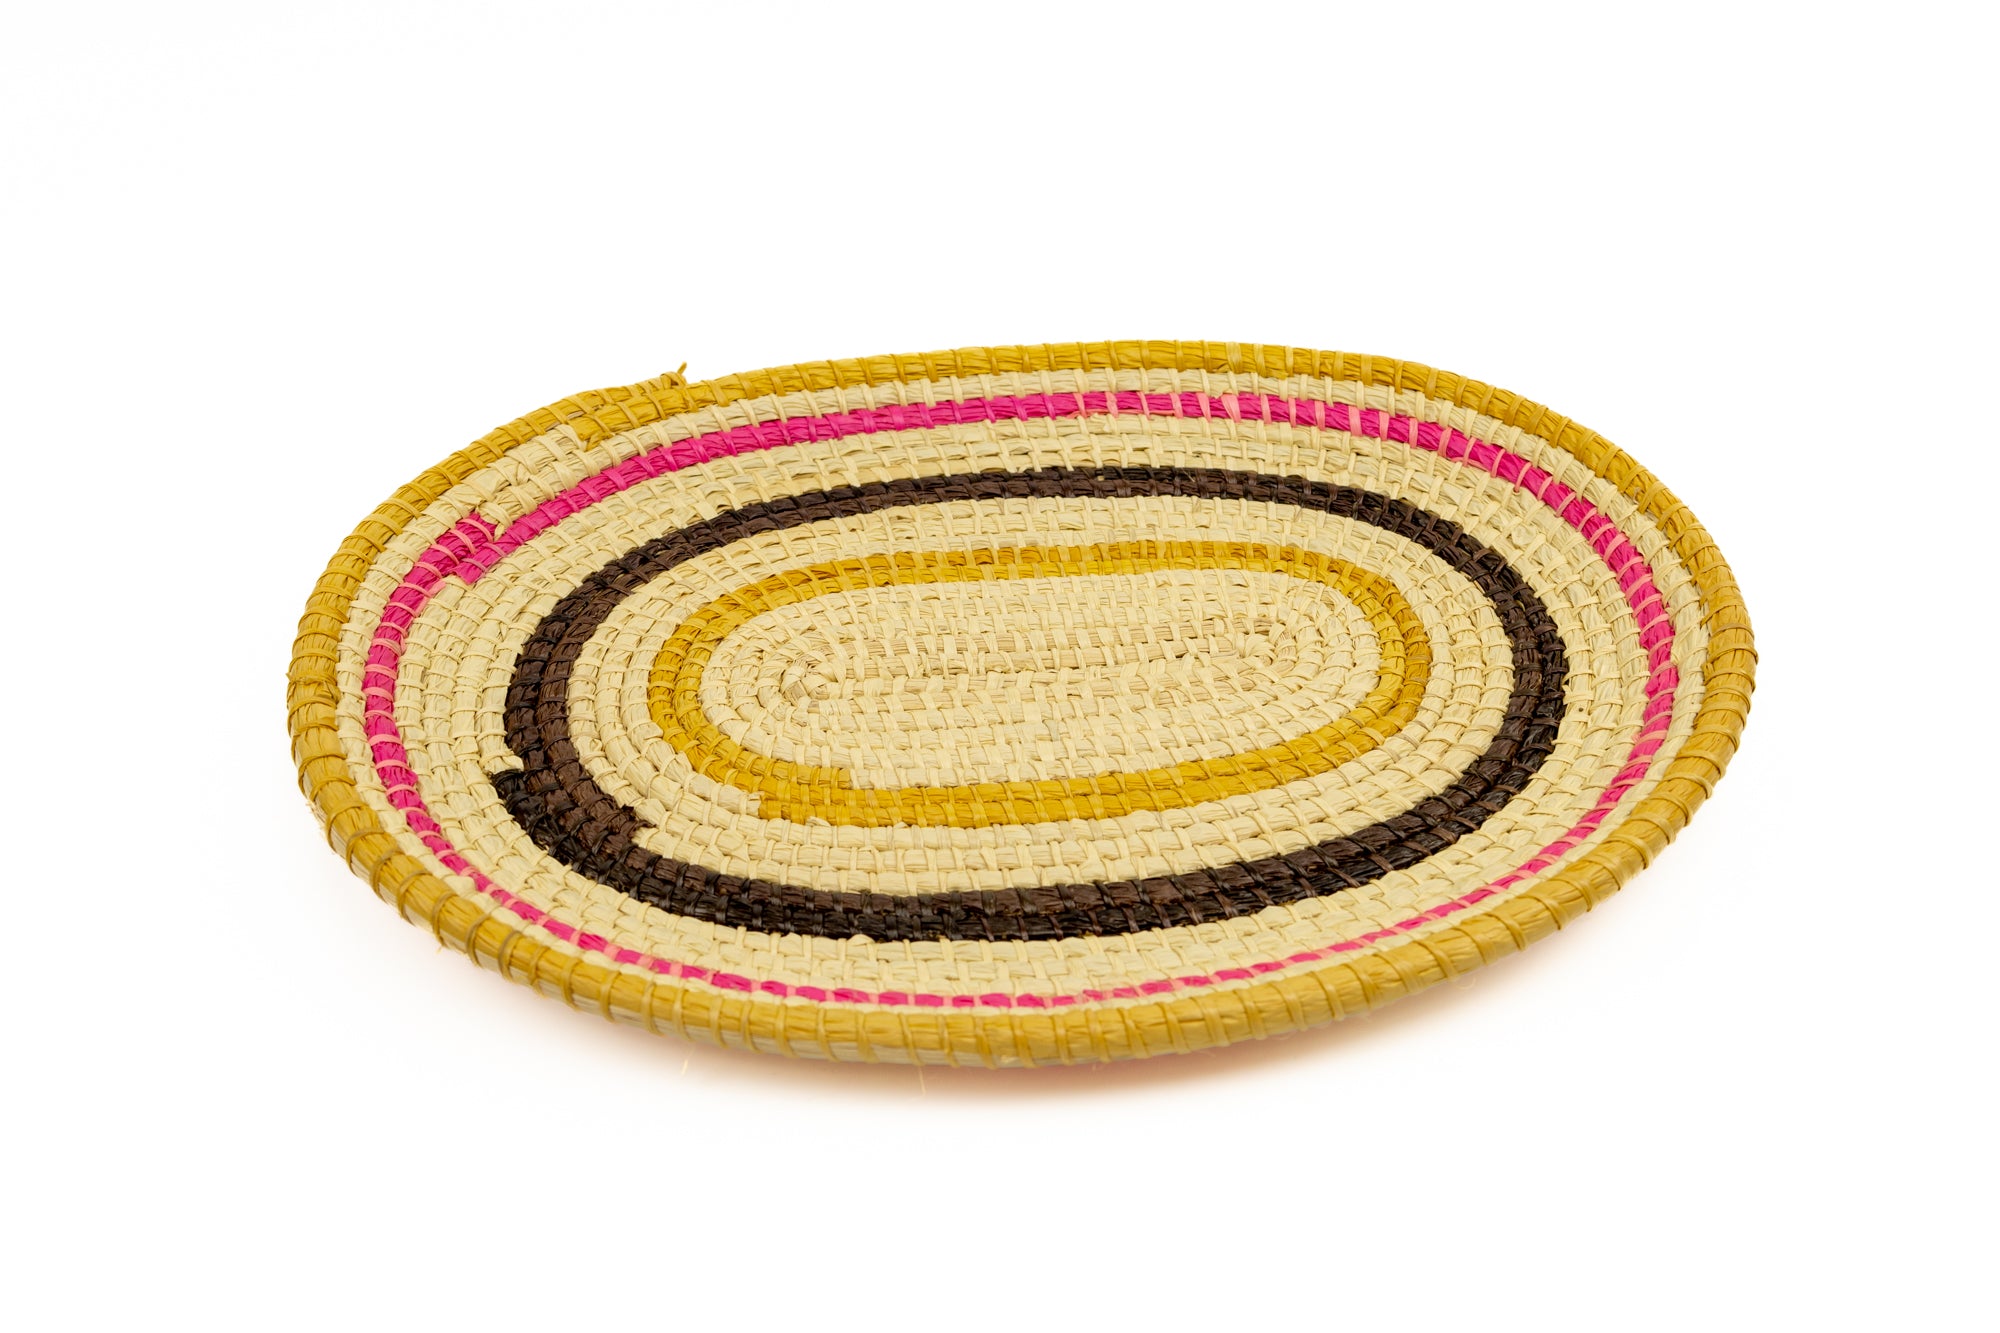 Pink, gold, brown and white.  Oval design. Hand woven plate basket. Made in Panama.